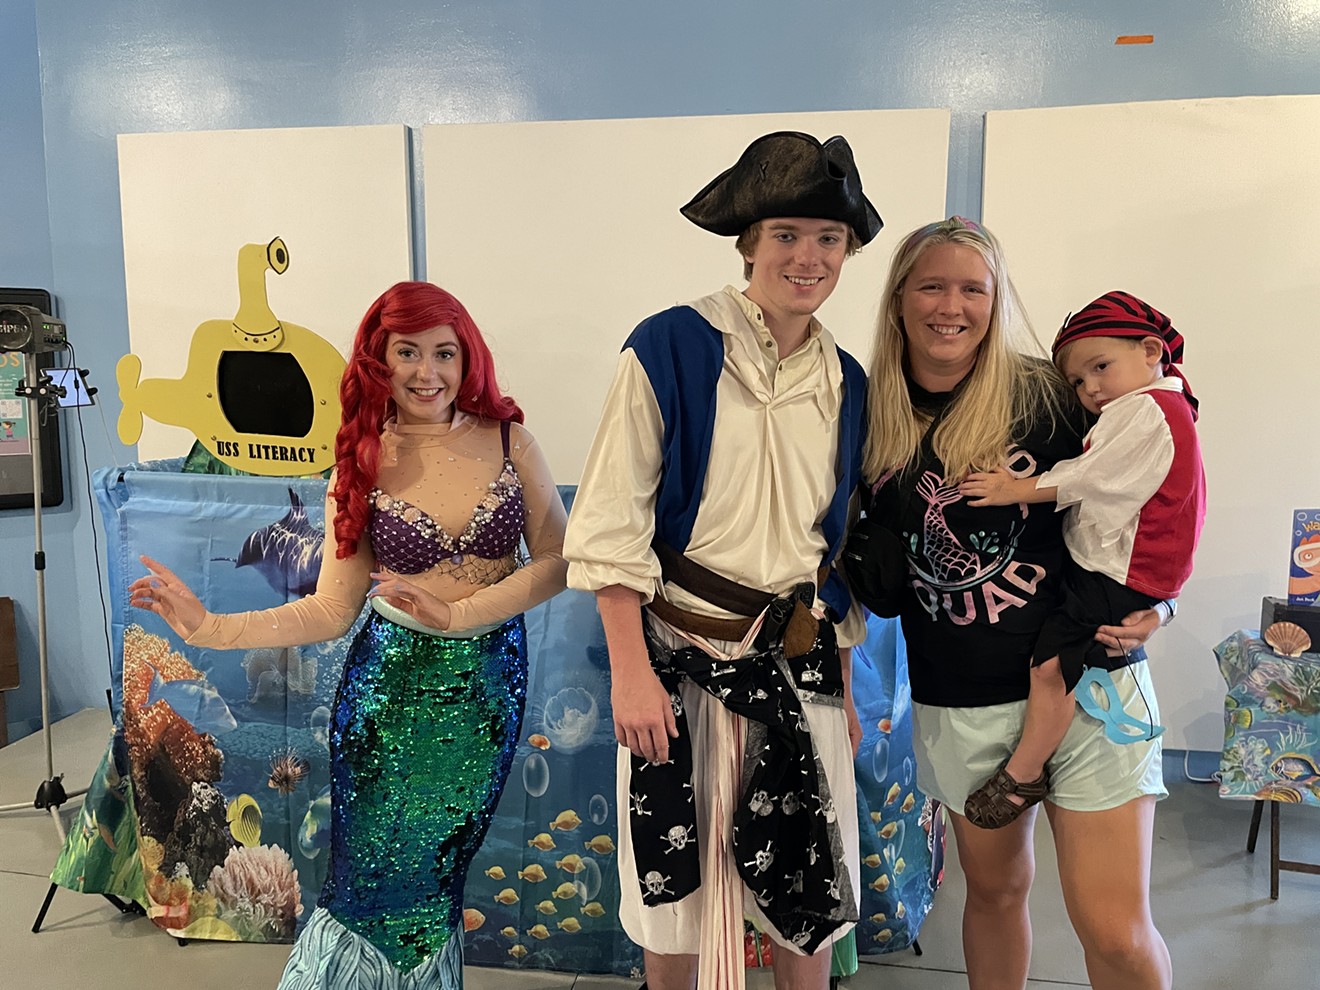 Pirate ’n Mermaid Day at The Woodlands Children’s Museum